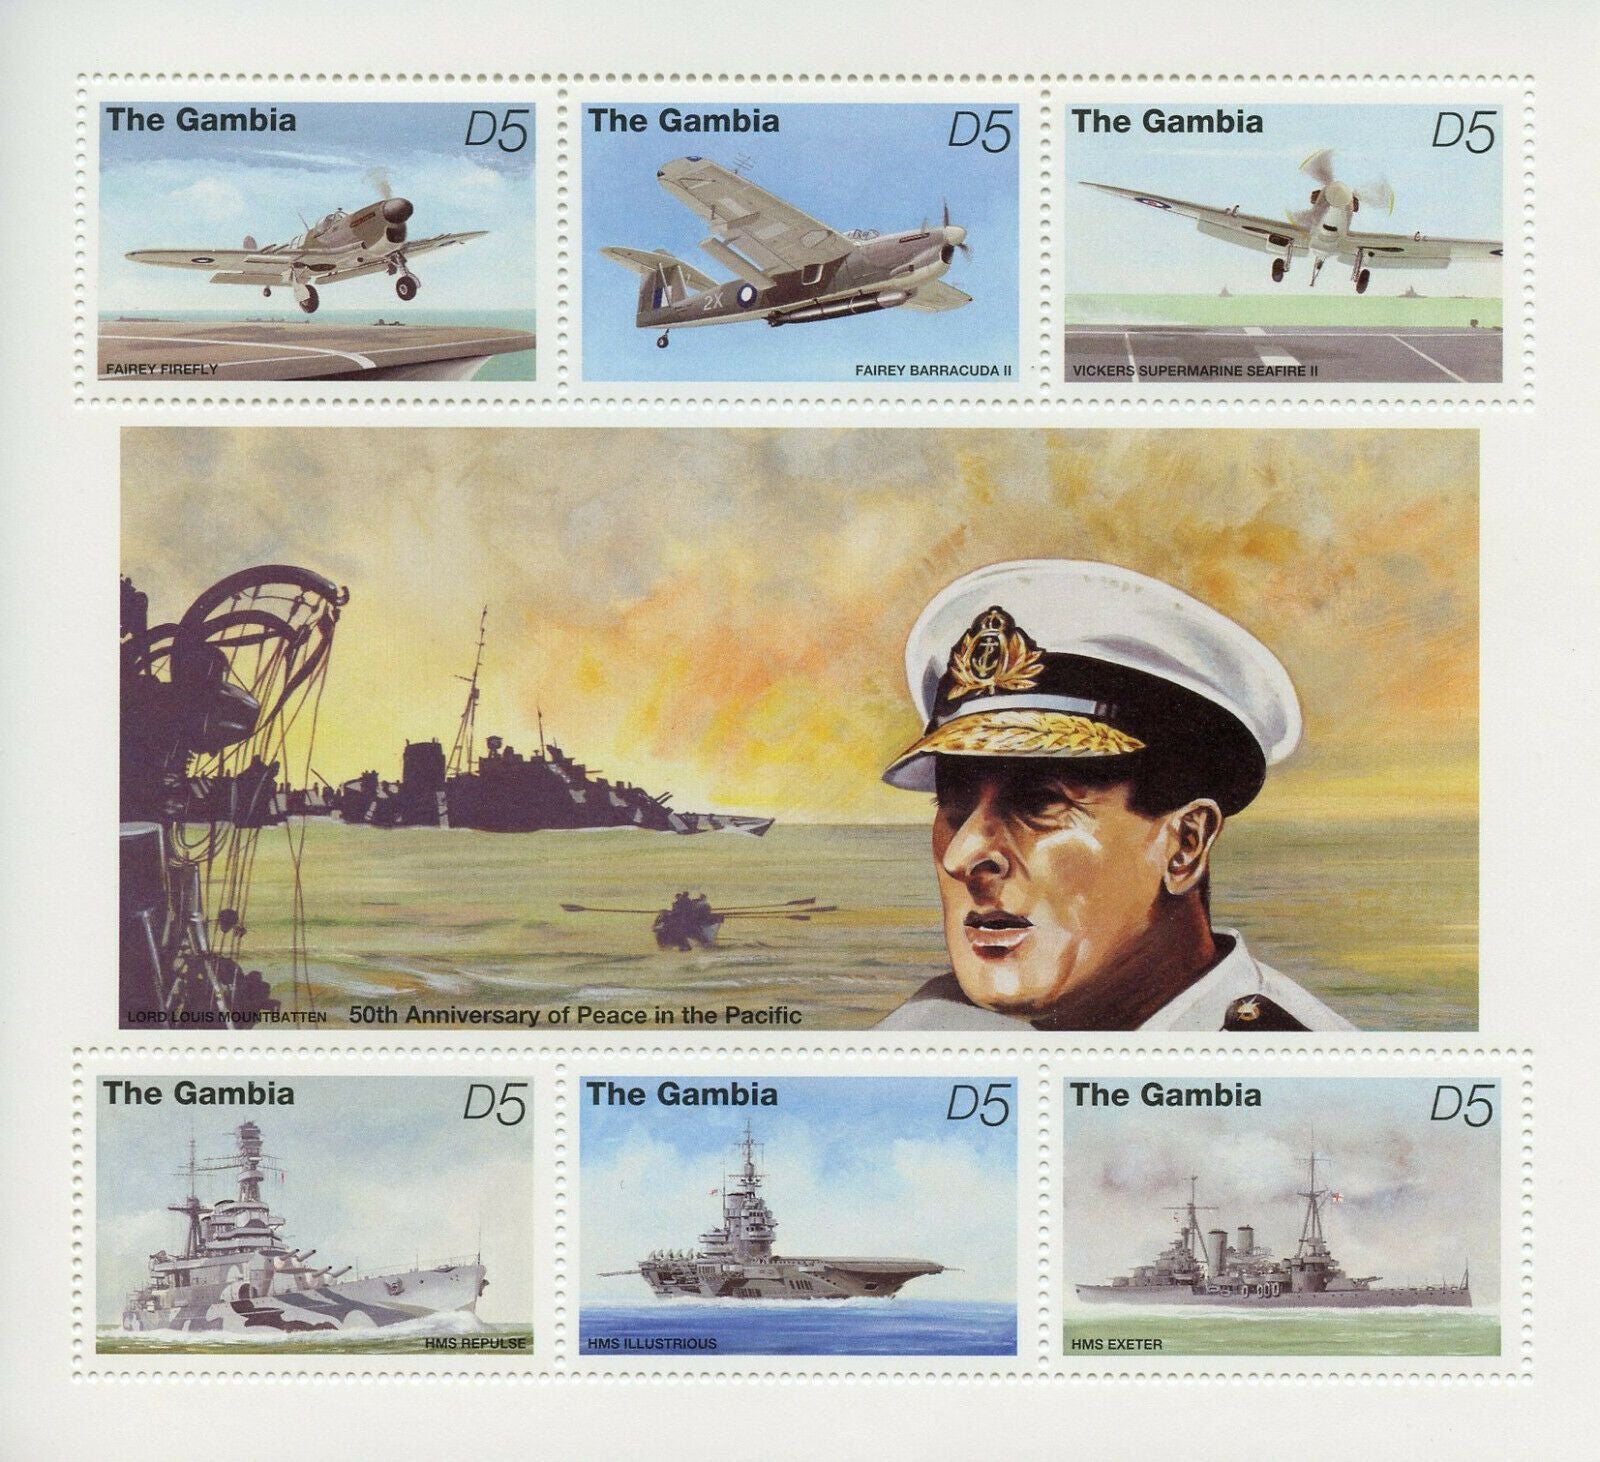 Gambia 1995 MNH Military Ships Stamps WWII WW2 VJ Day Peace in Pacific 6v M/S